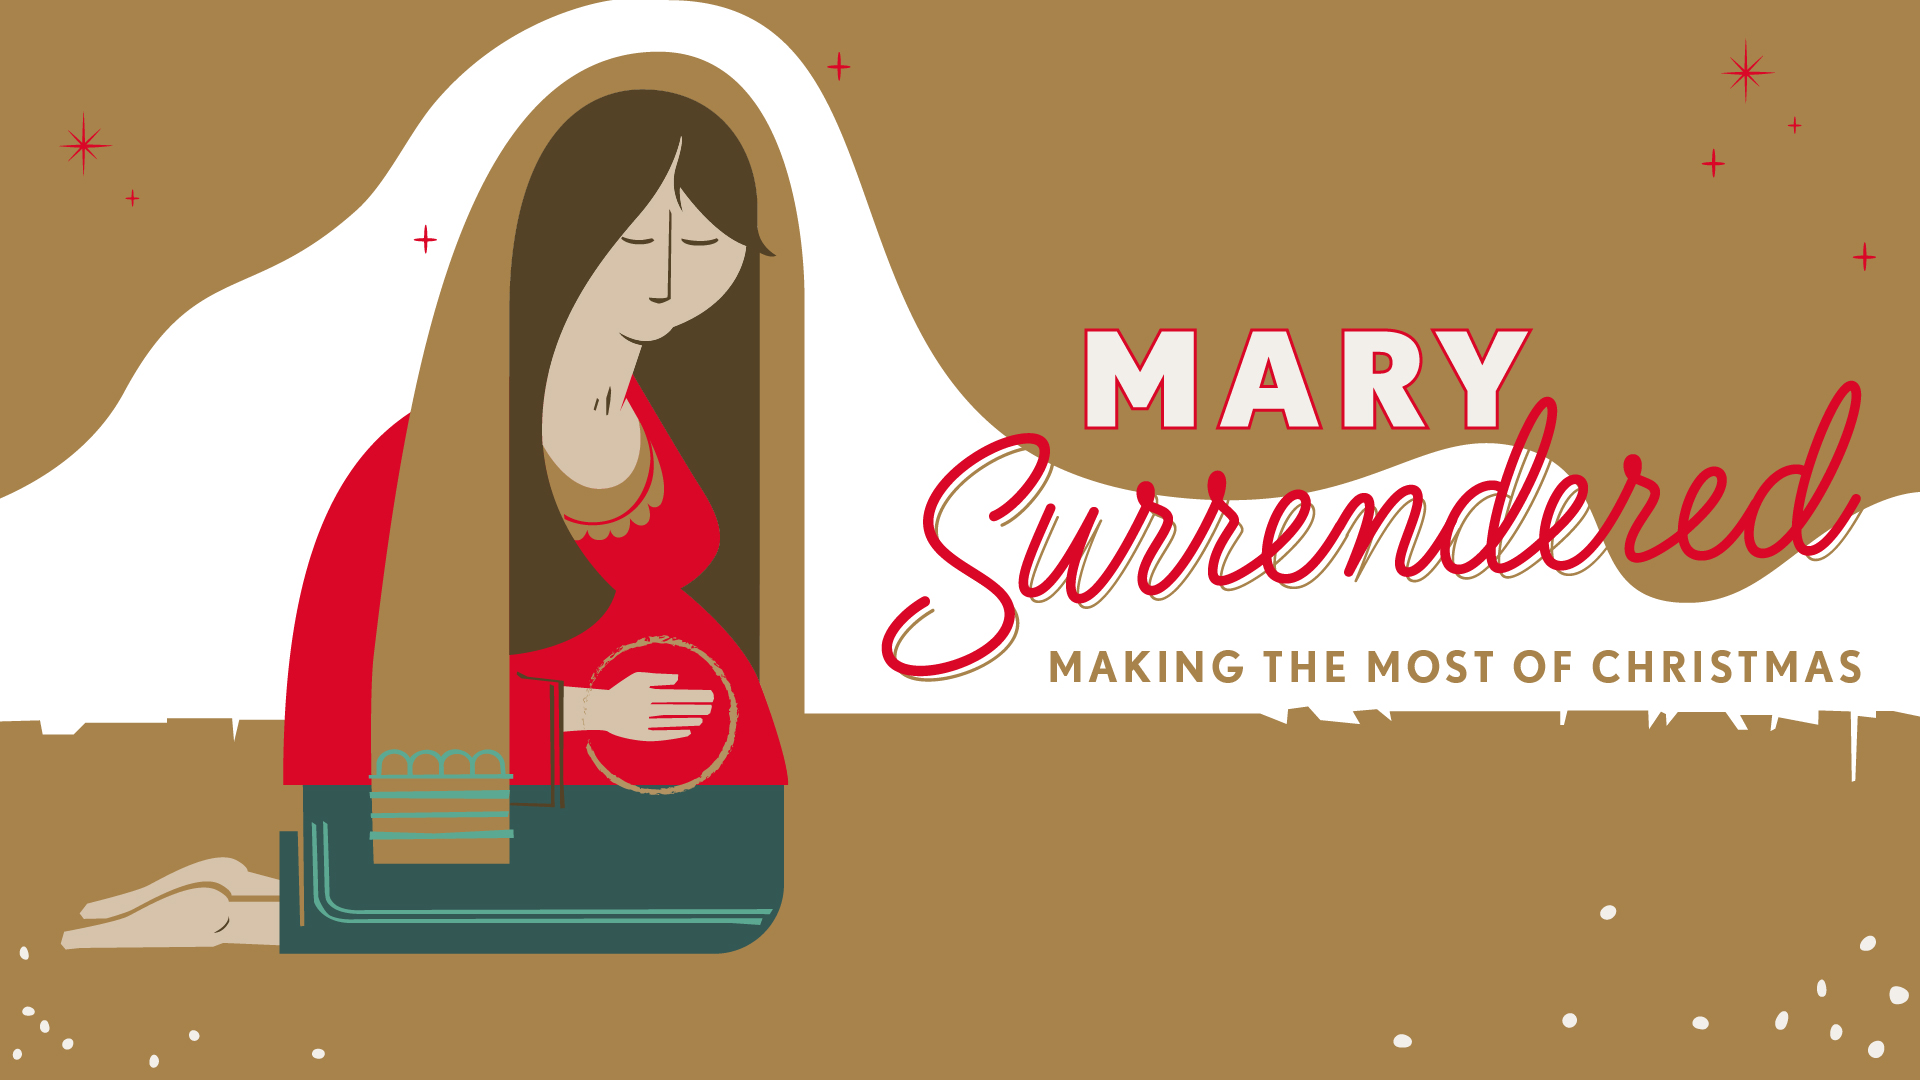 Making the Most of Christmas: Mary